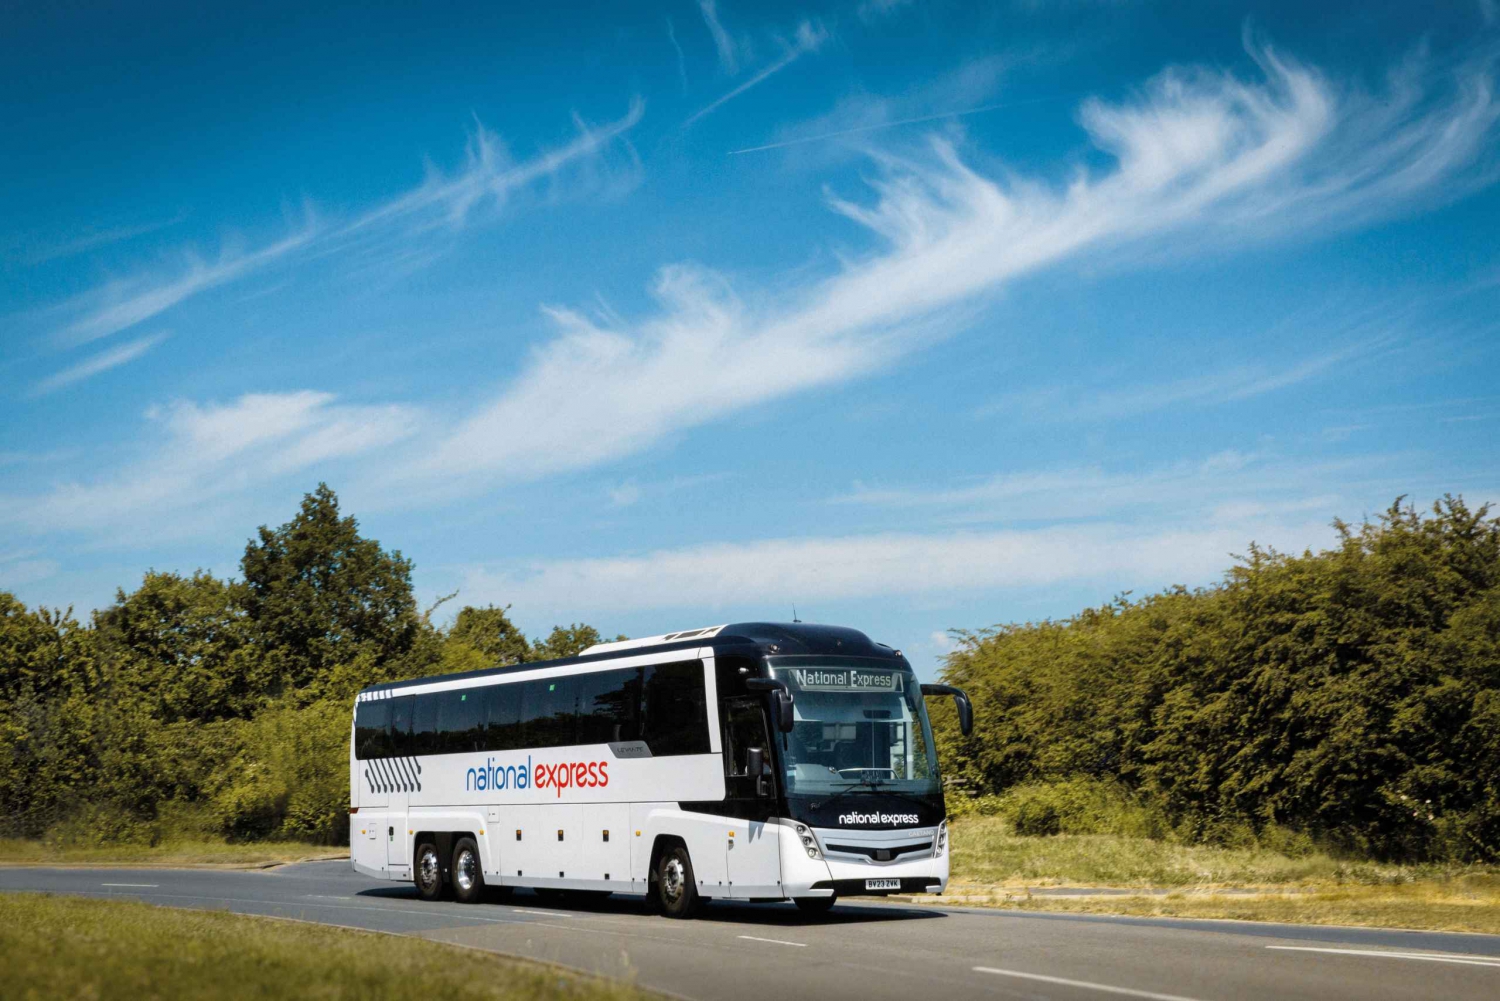 London: Heathrow Airport to/from Central London Bus Transfer